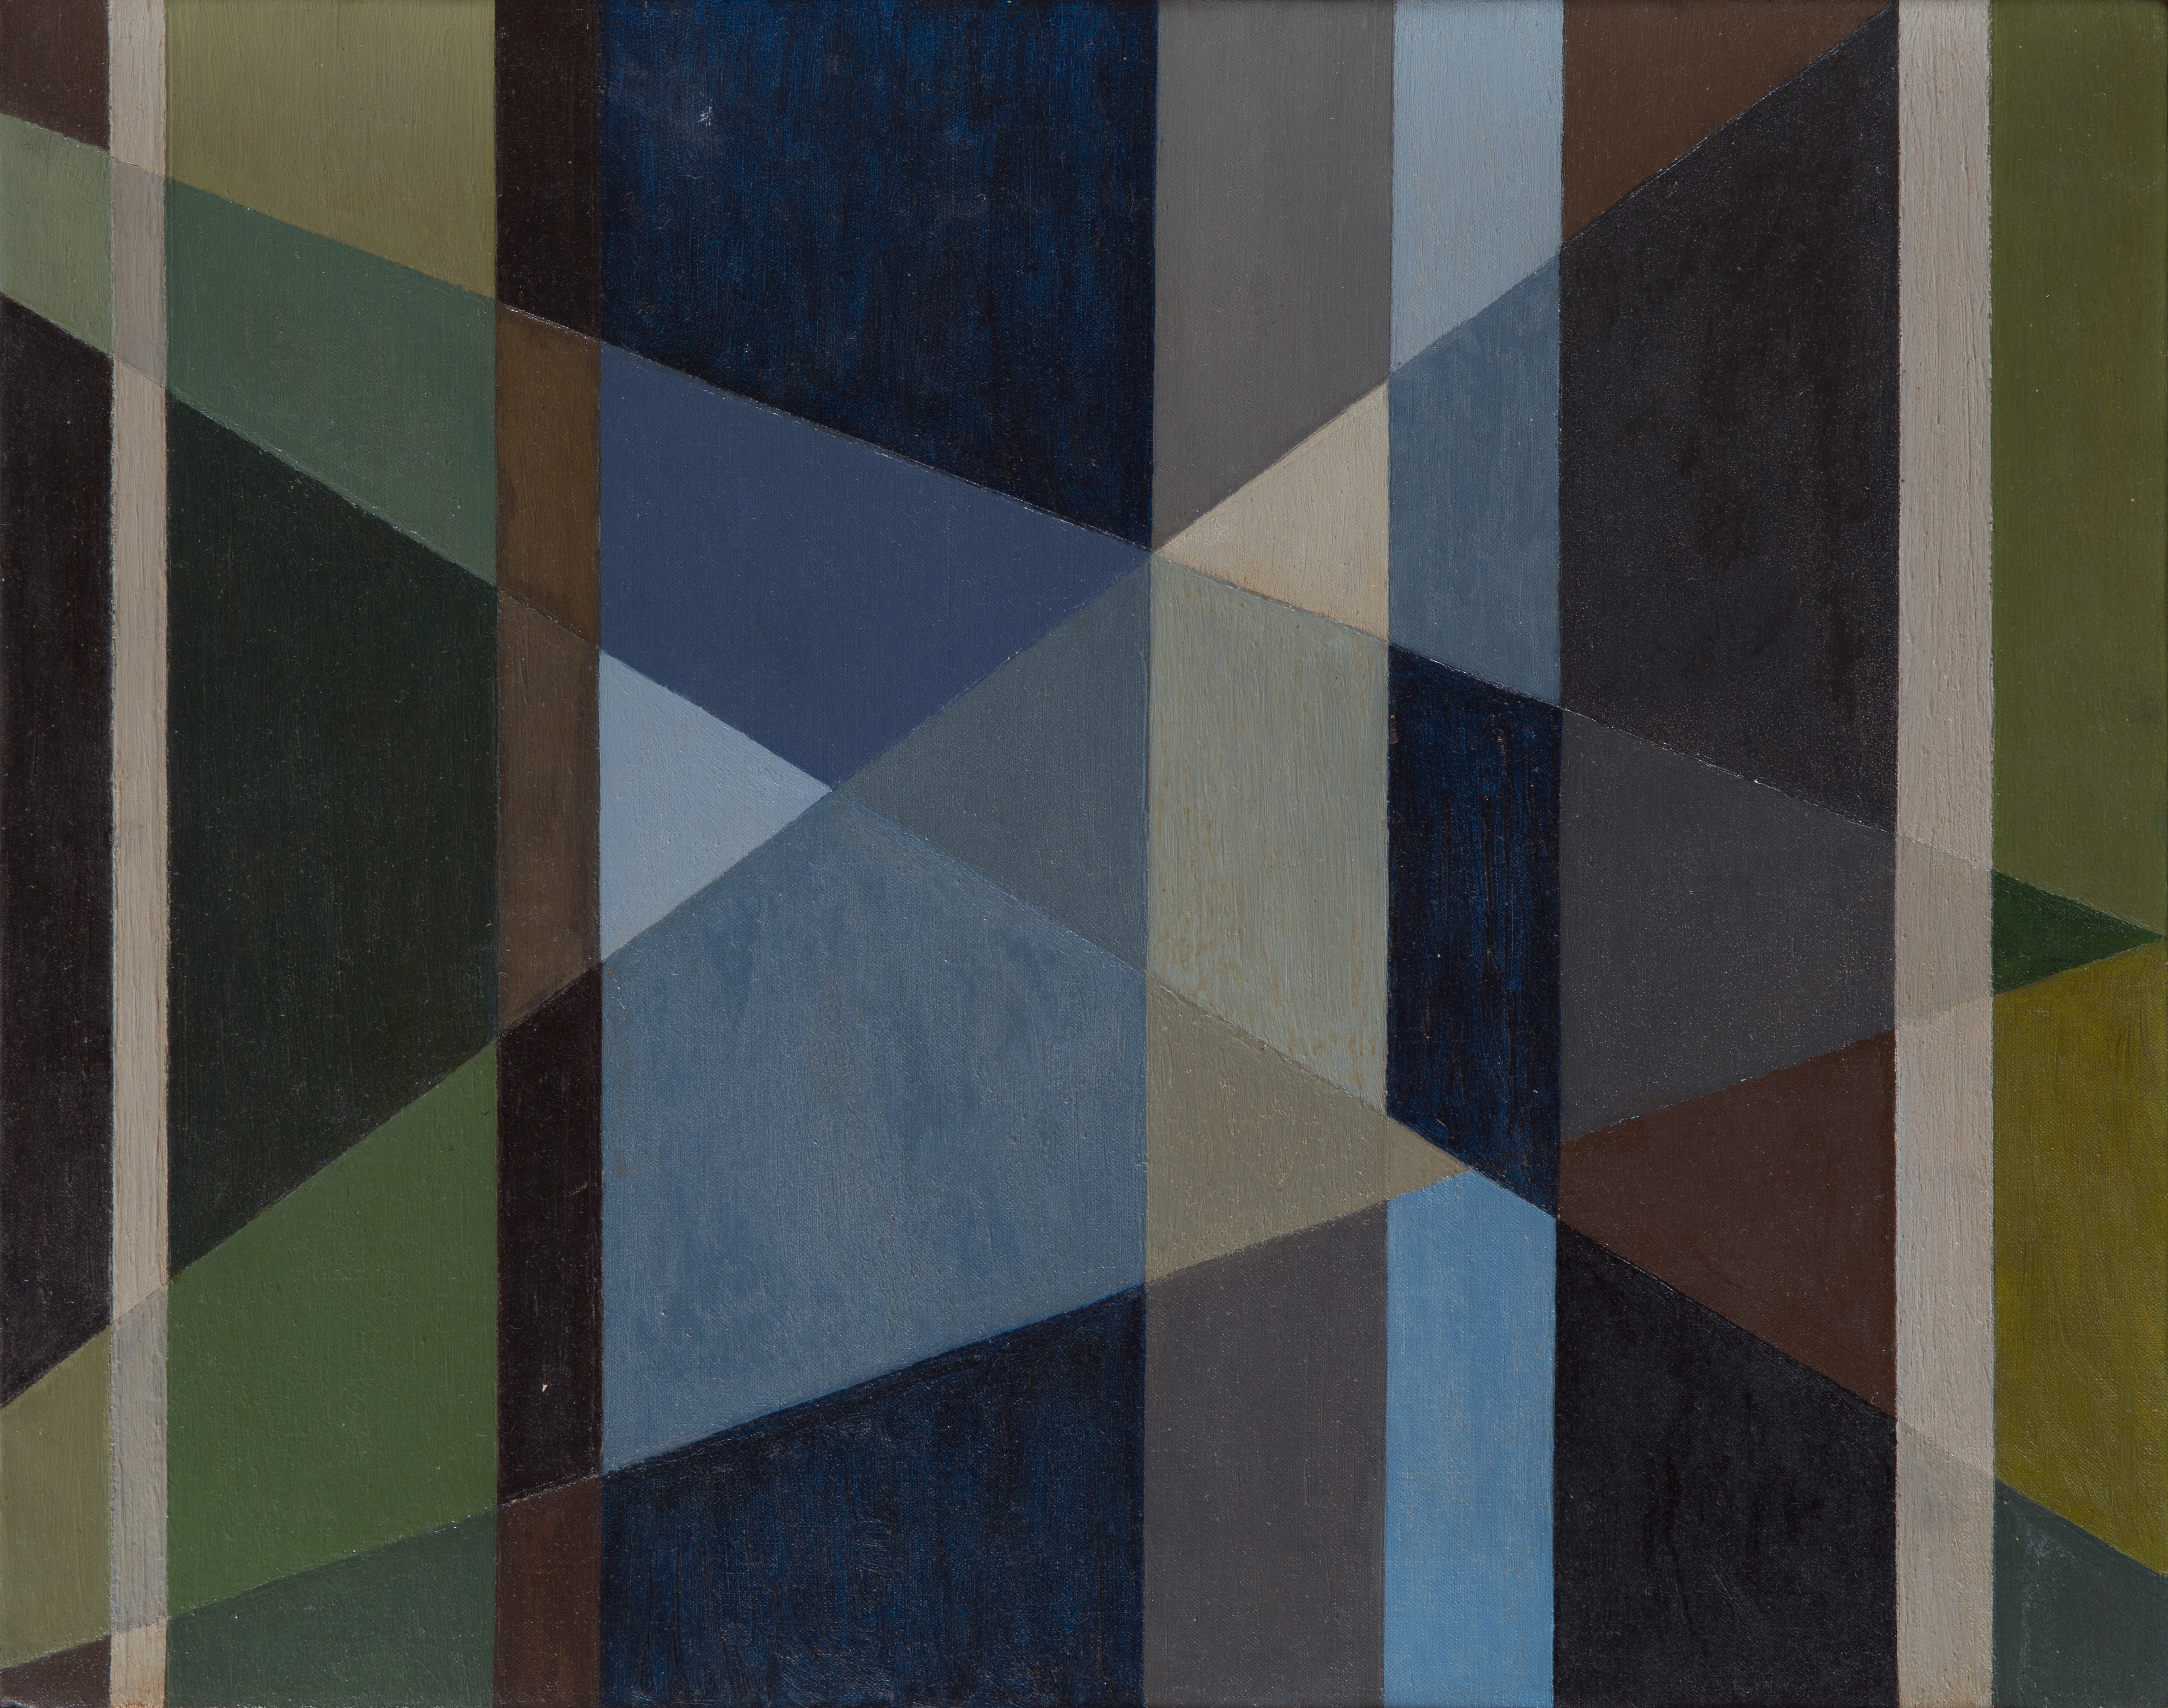 Abstract oil painting of geometric shapes, varying in blue, green, and brown tones.